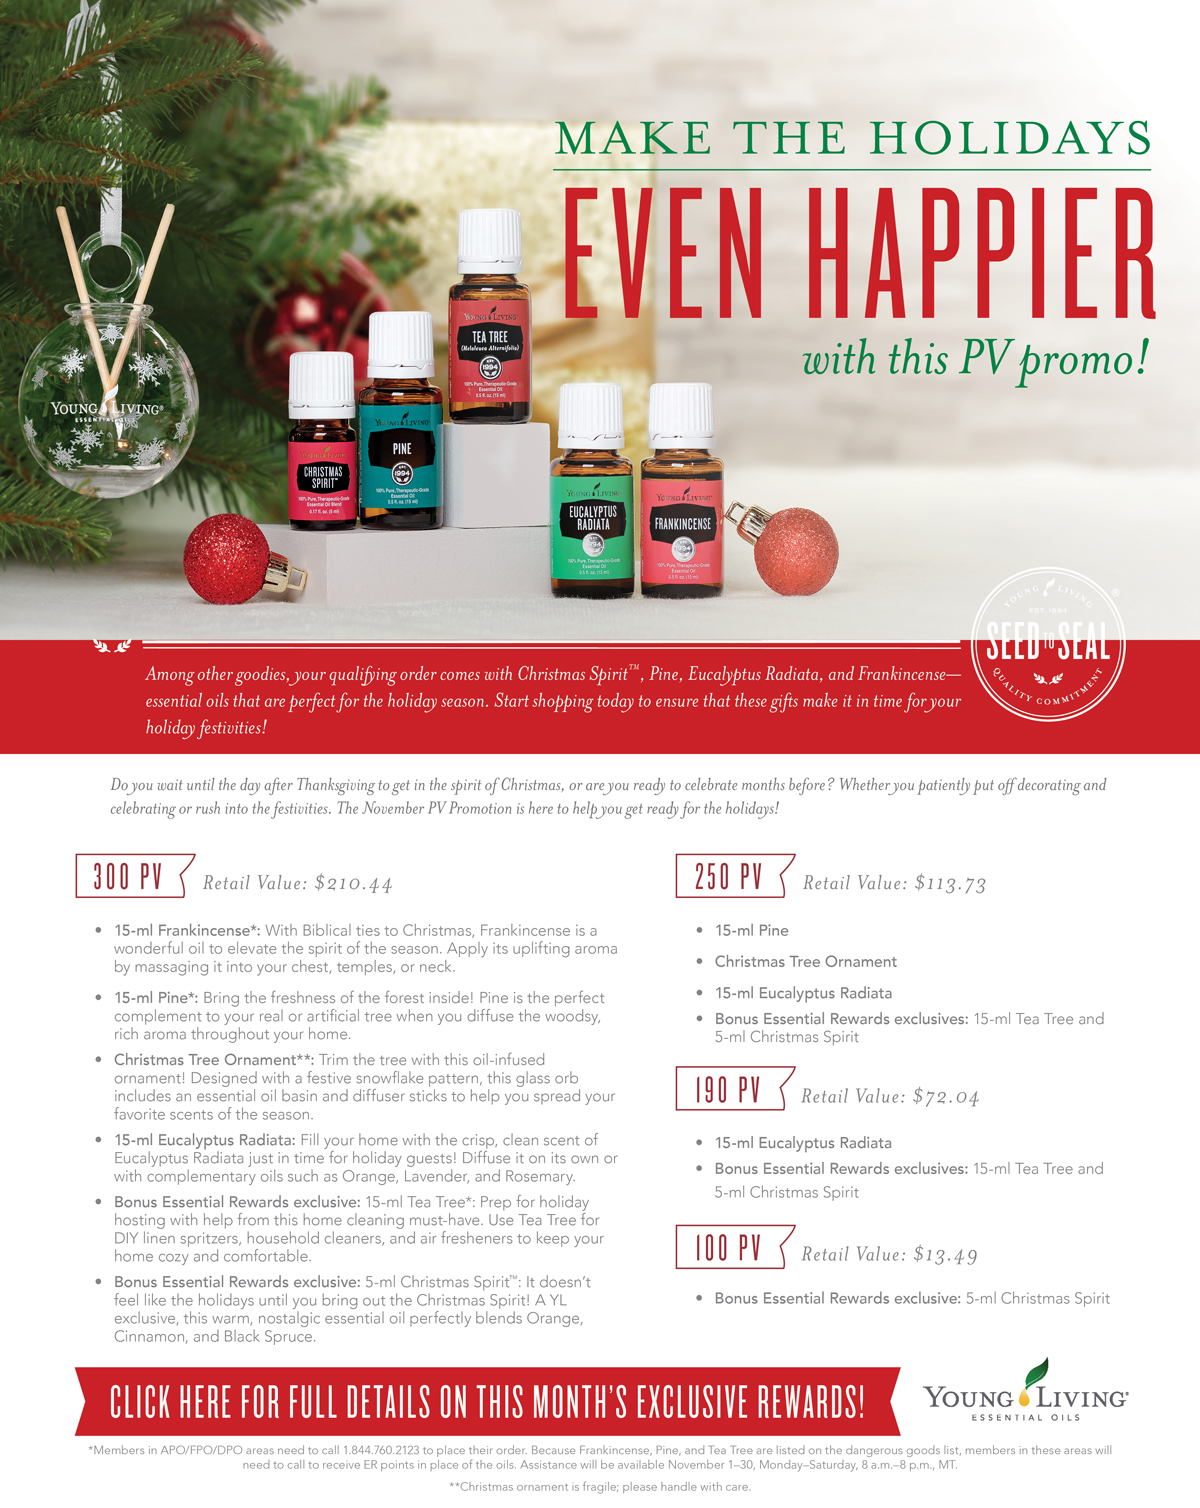 Young Living November 2017 Promotion